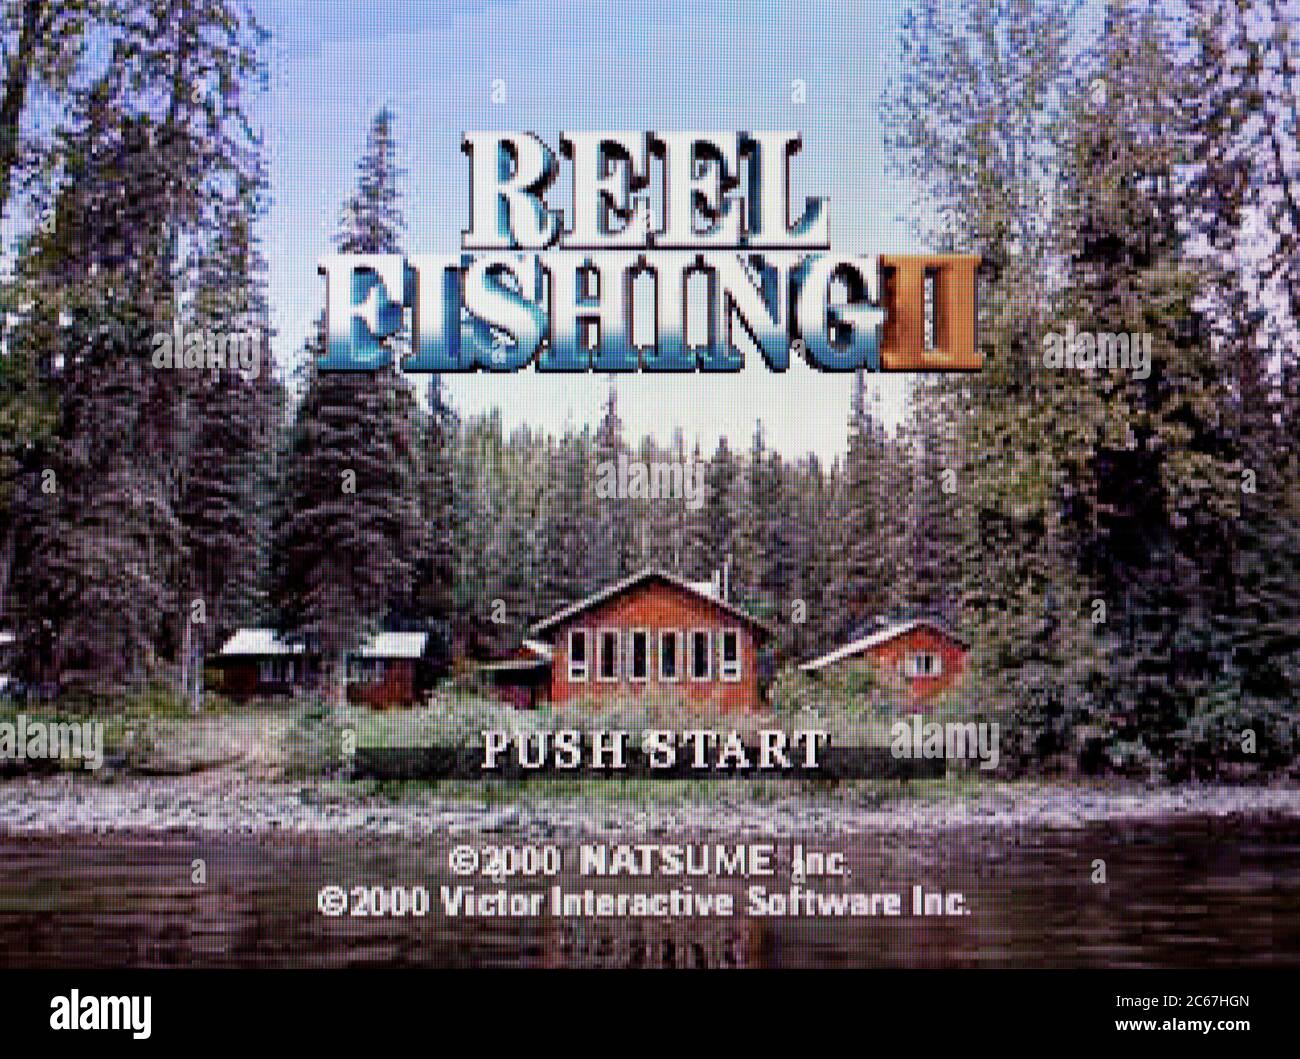 Reel Fishing II 2 - Sony Playstation 1 PS1 PSX - Editorial use only Stock  Photo - Alamy